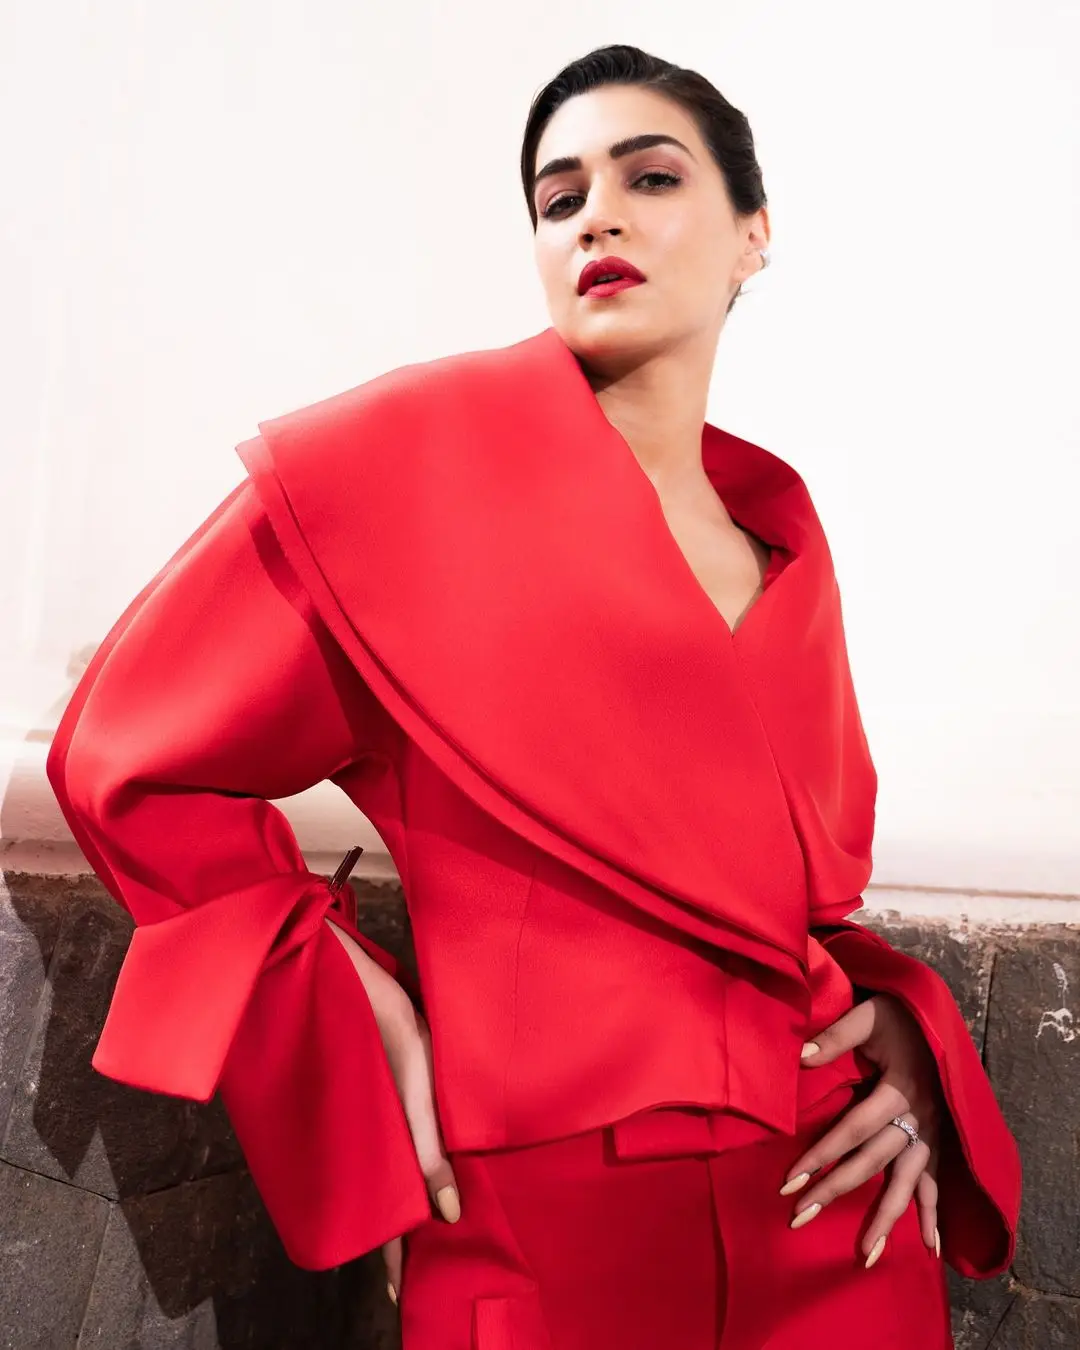 BOLLYWOOD ACTRESS KRITI SANON PHOTOSHOOT IN RED GOWN 5